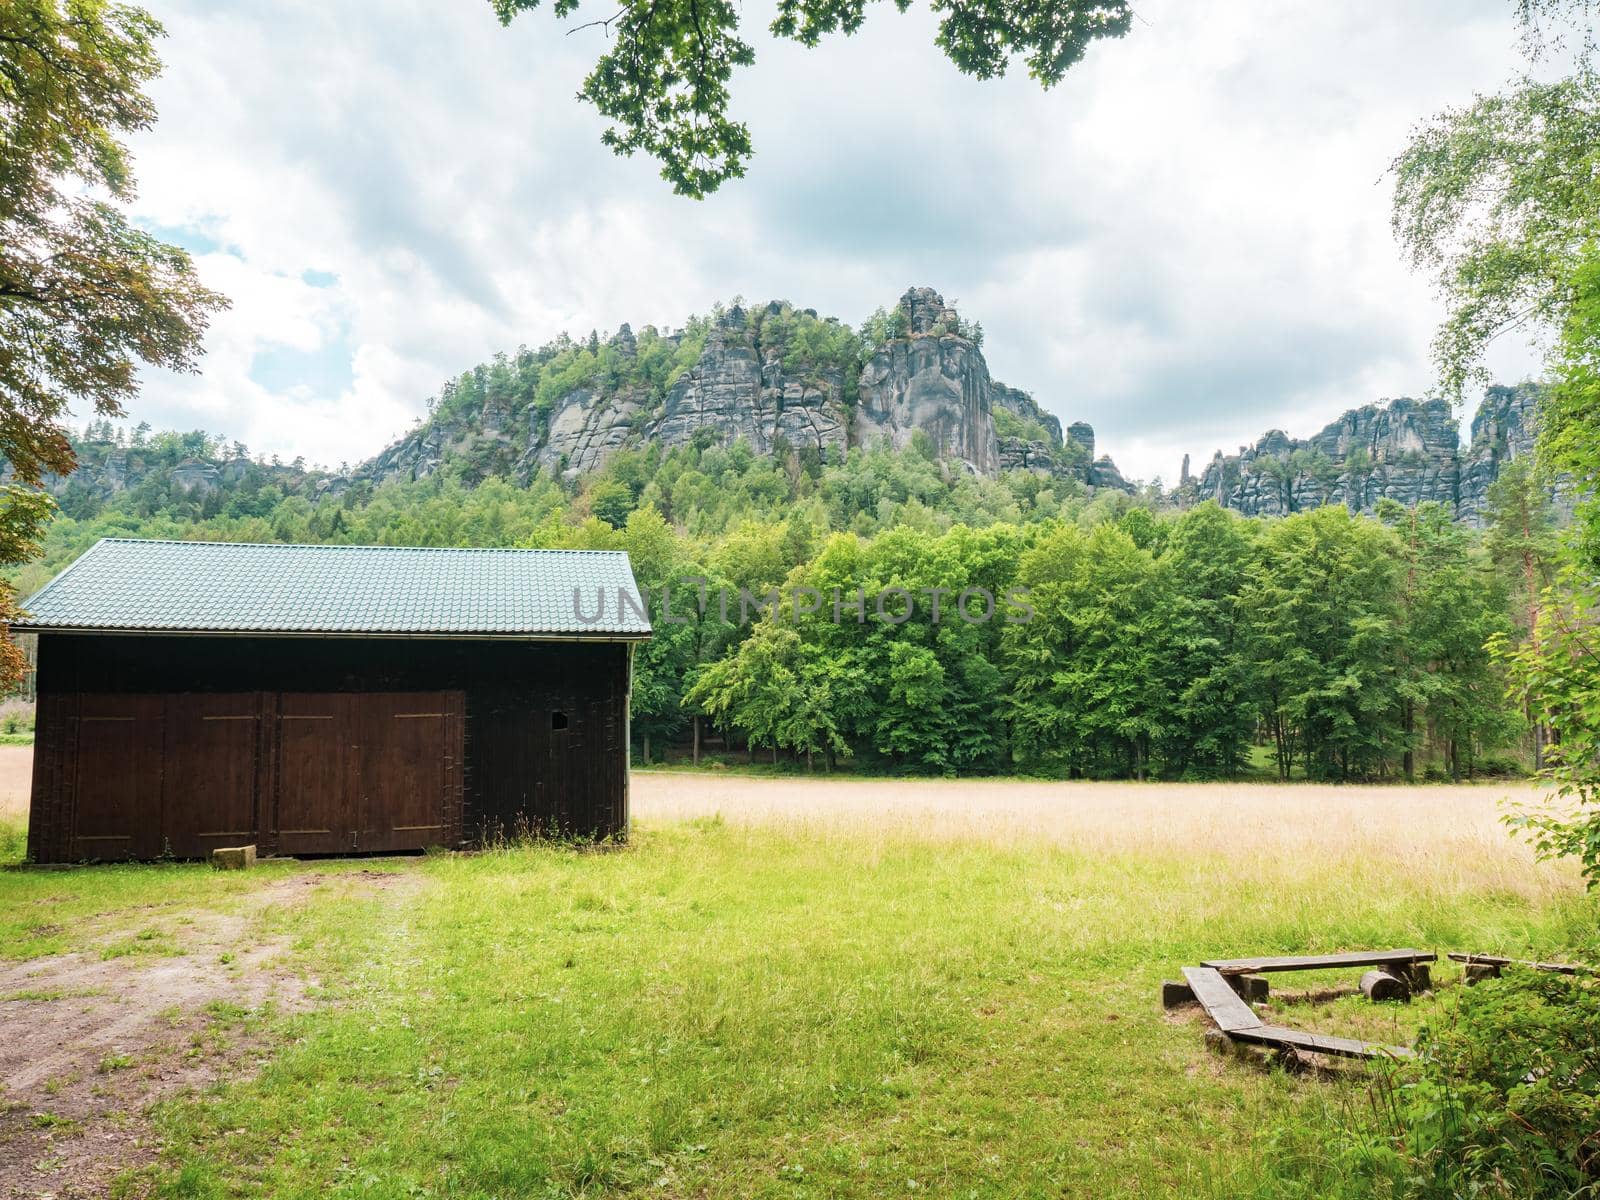 Shelter at meadow close to Schrammsteine and landscape in Saxon Switzerland park on hiking trail Germany